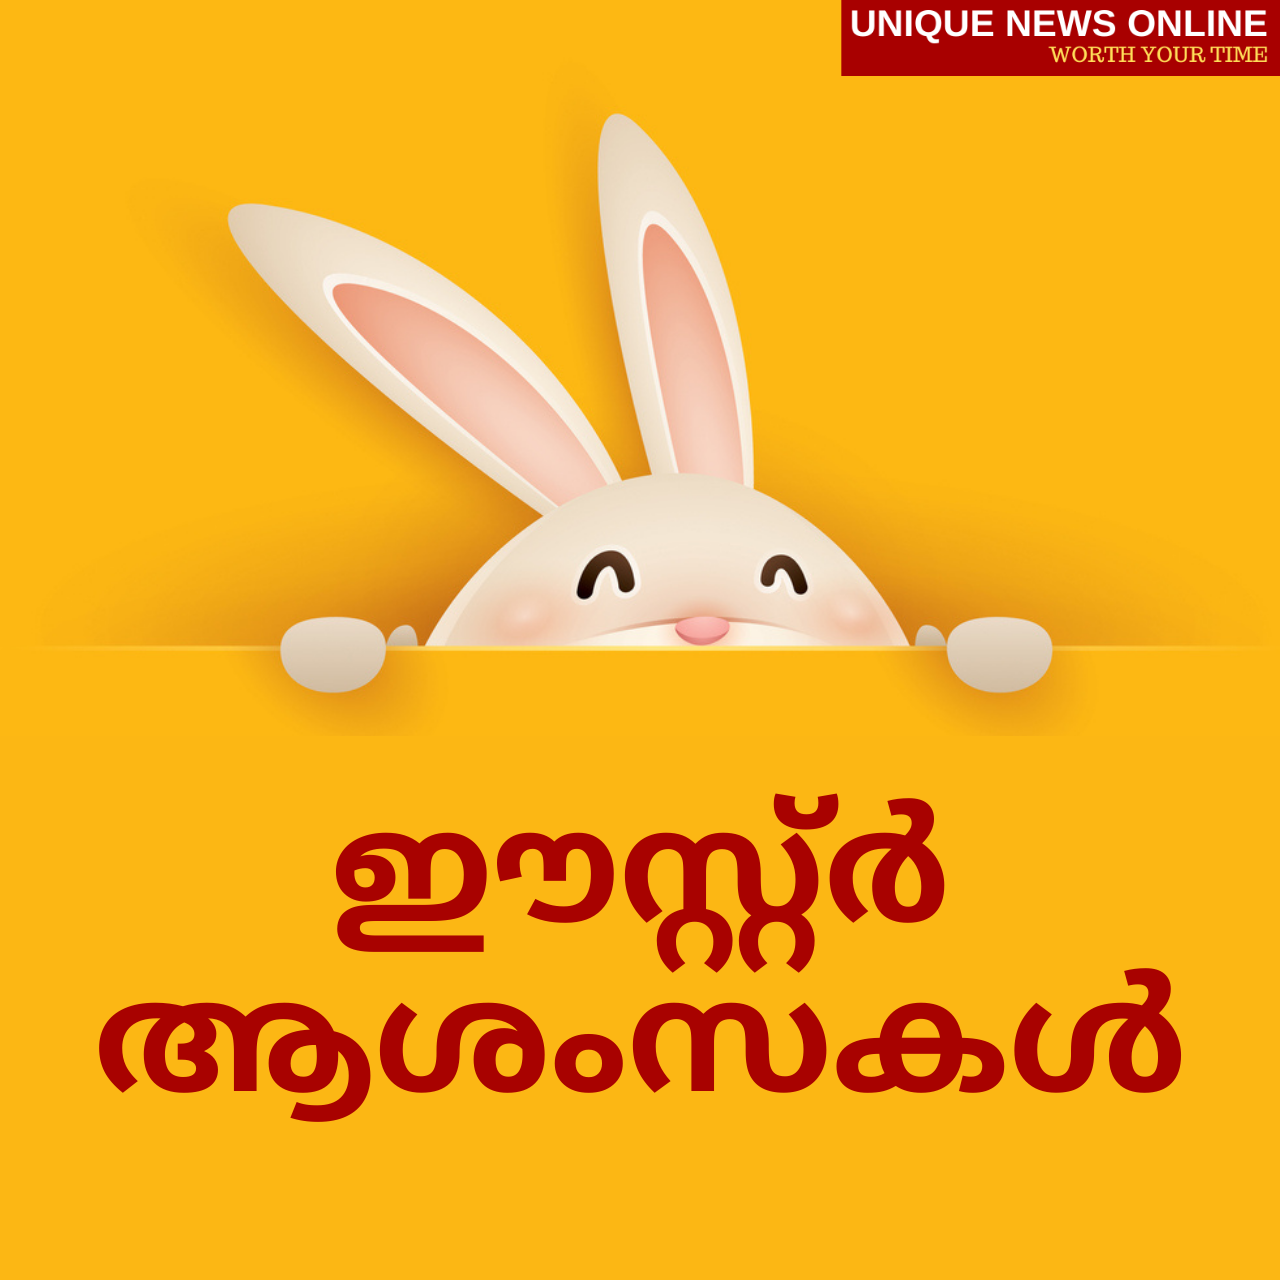 Happy Easter 2021 Wishes in Malayalam Messages, Quotes, Greetings and Images to Share on Easter Sunday